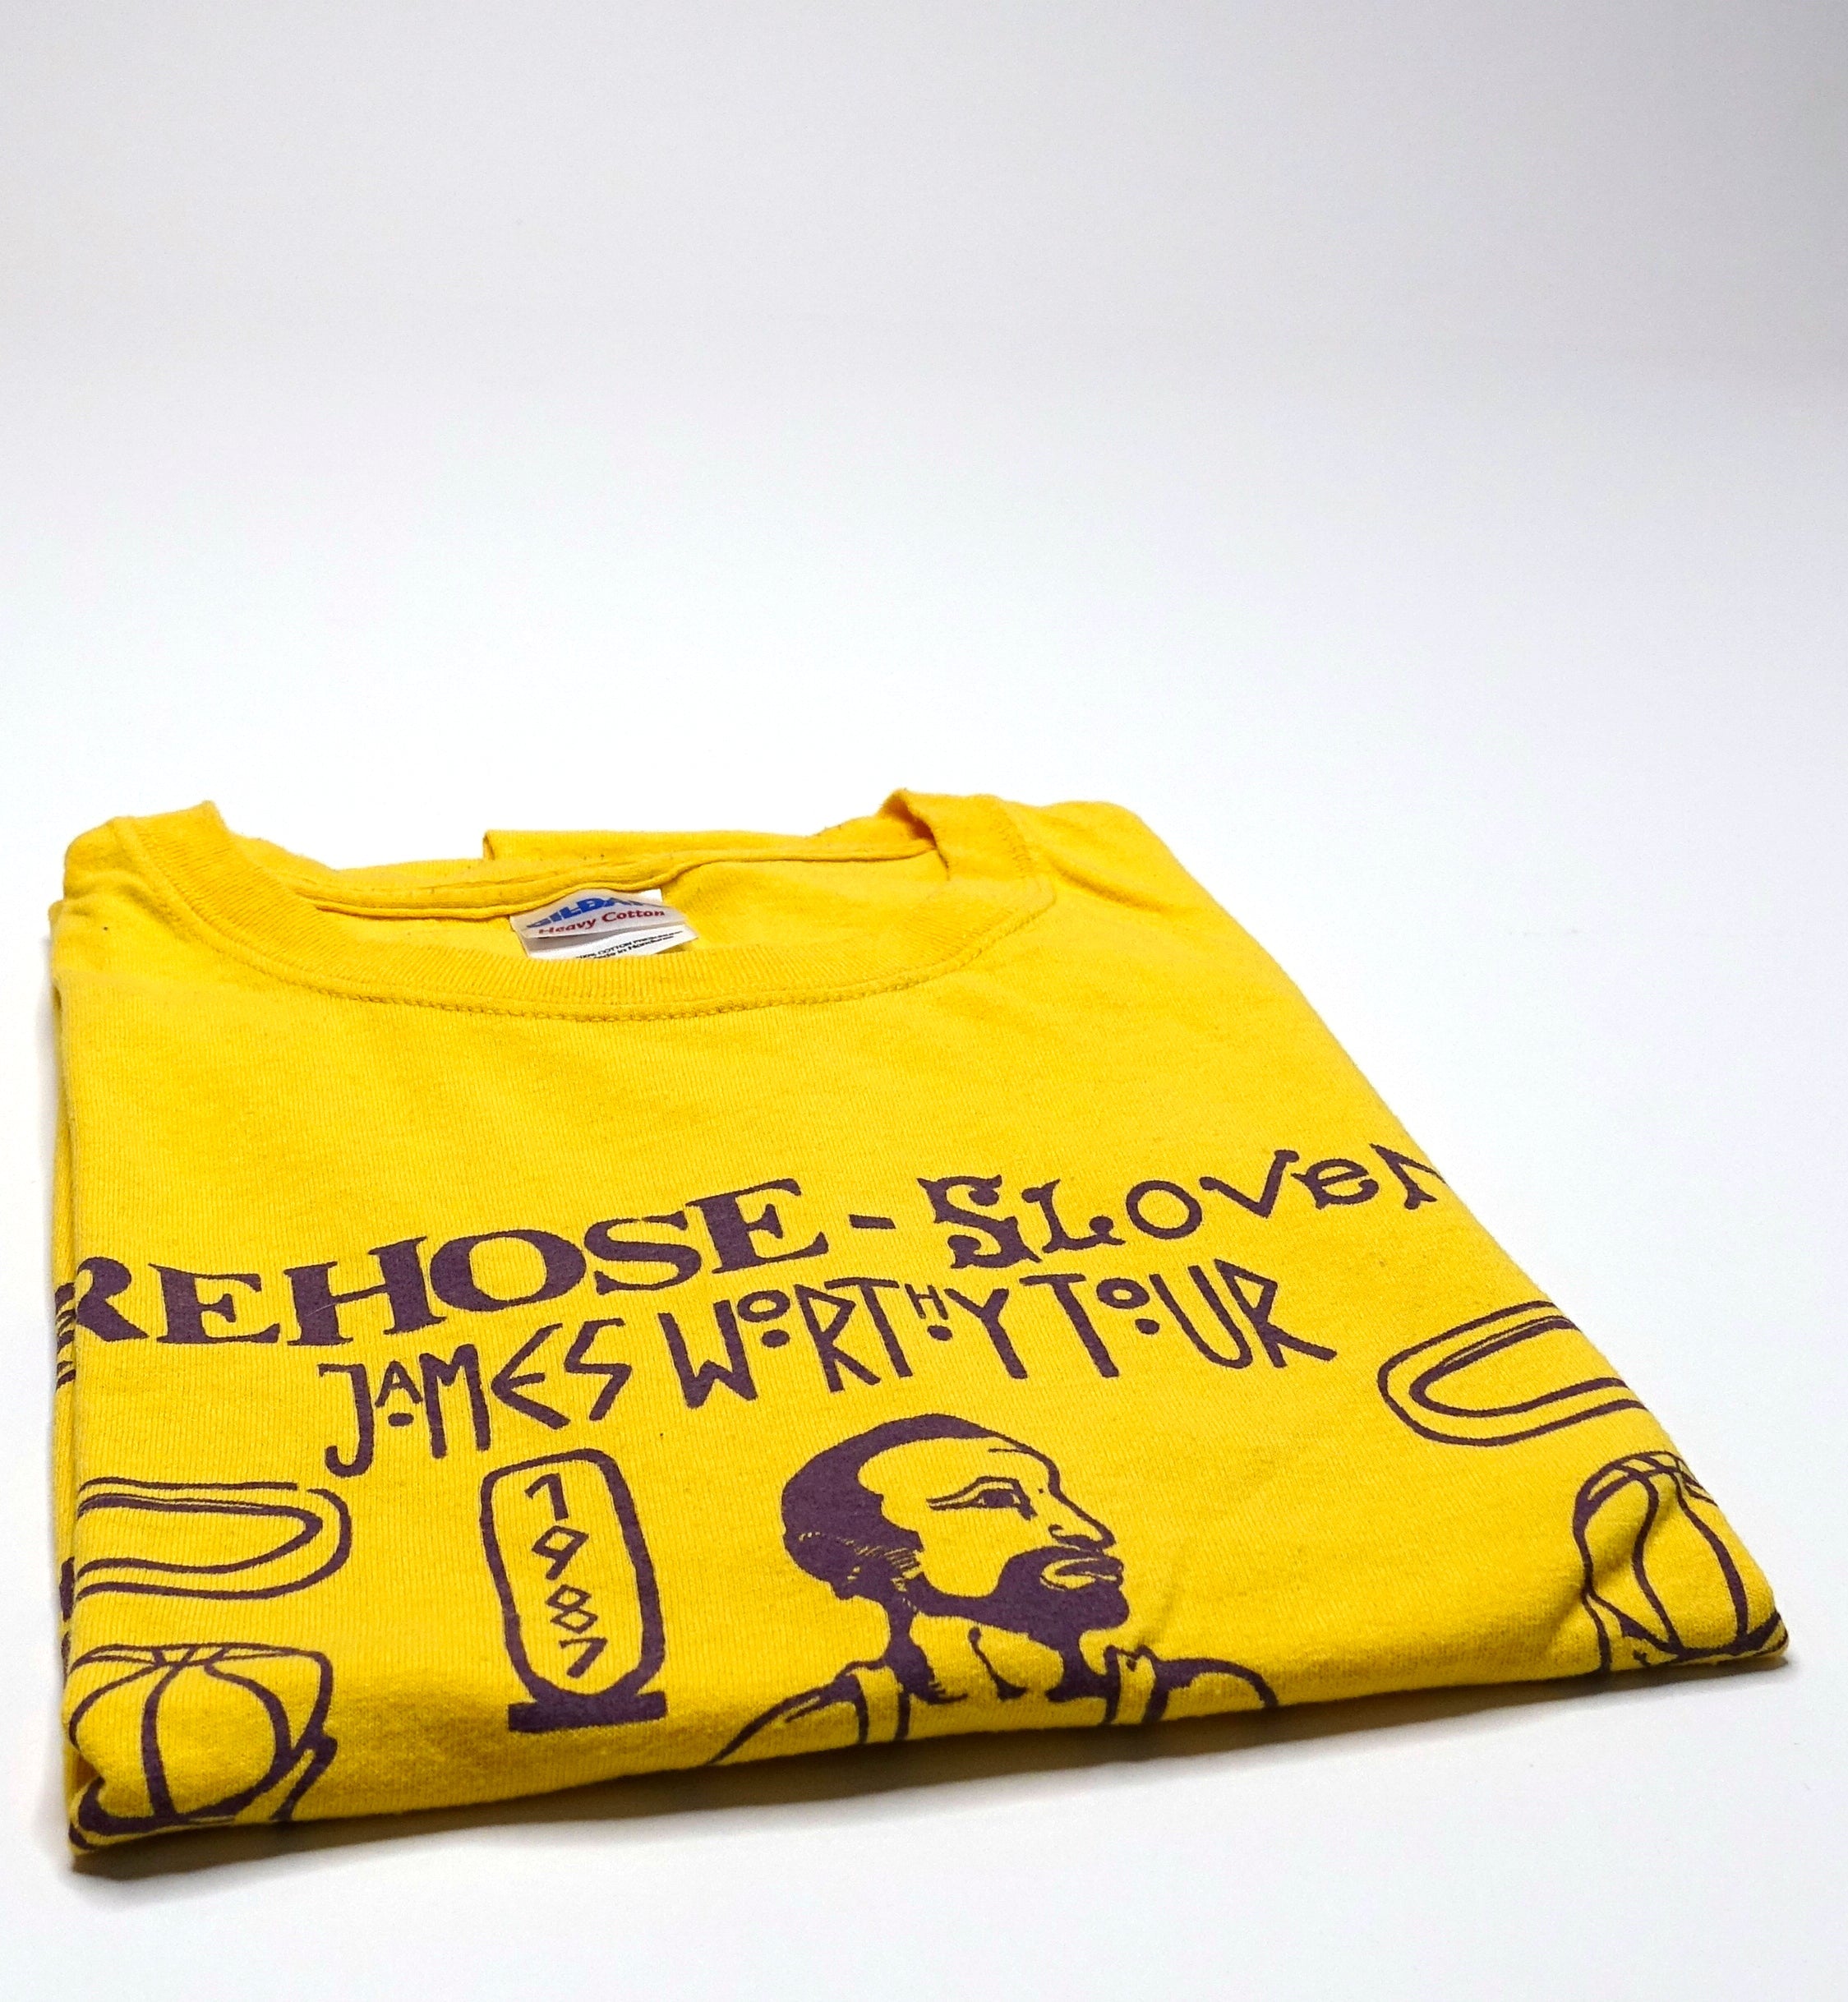 fIREHOSE / Slovenley - James Worthy 1987 Tour Shirt (Bootleg By Me) Size Large